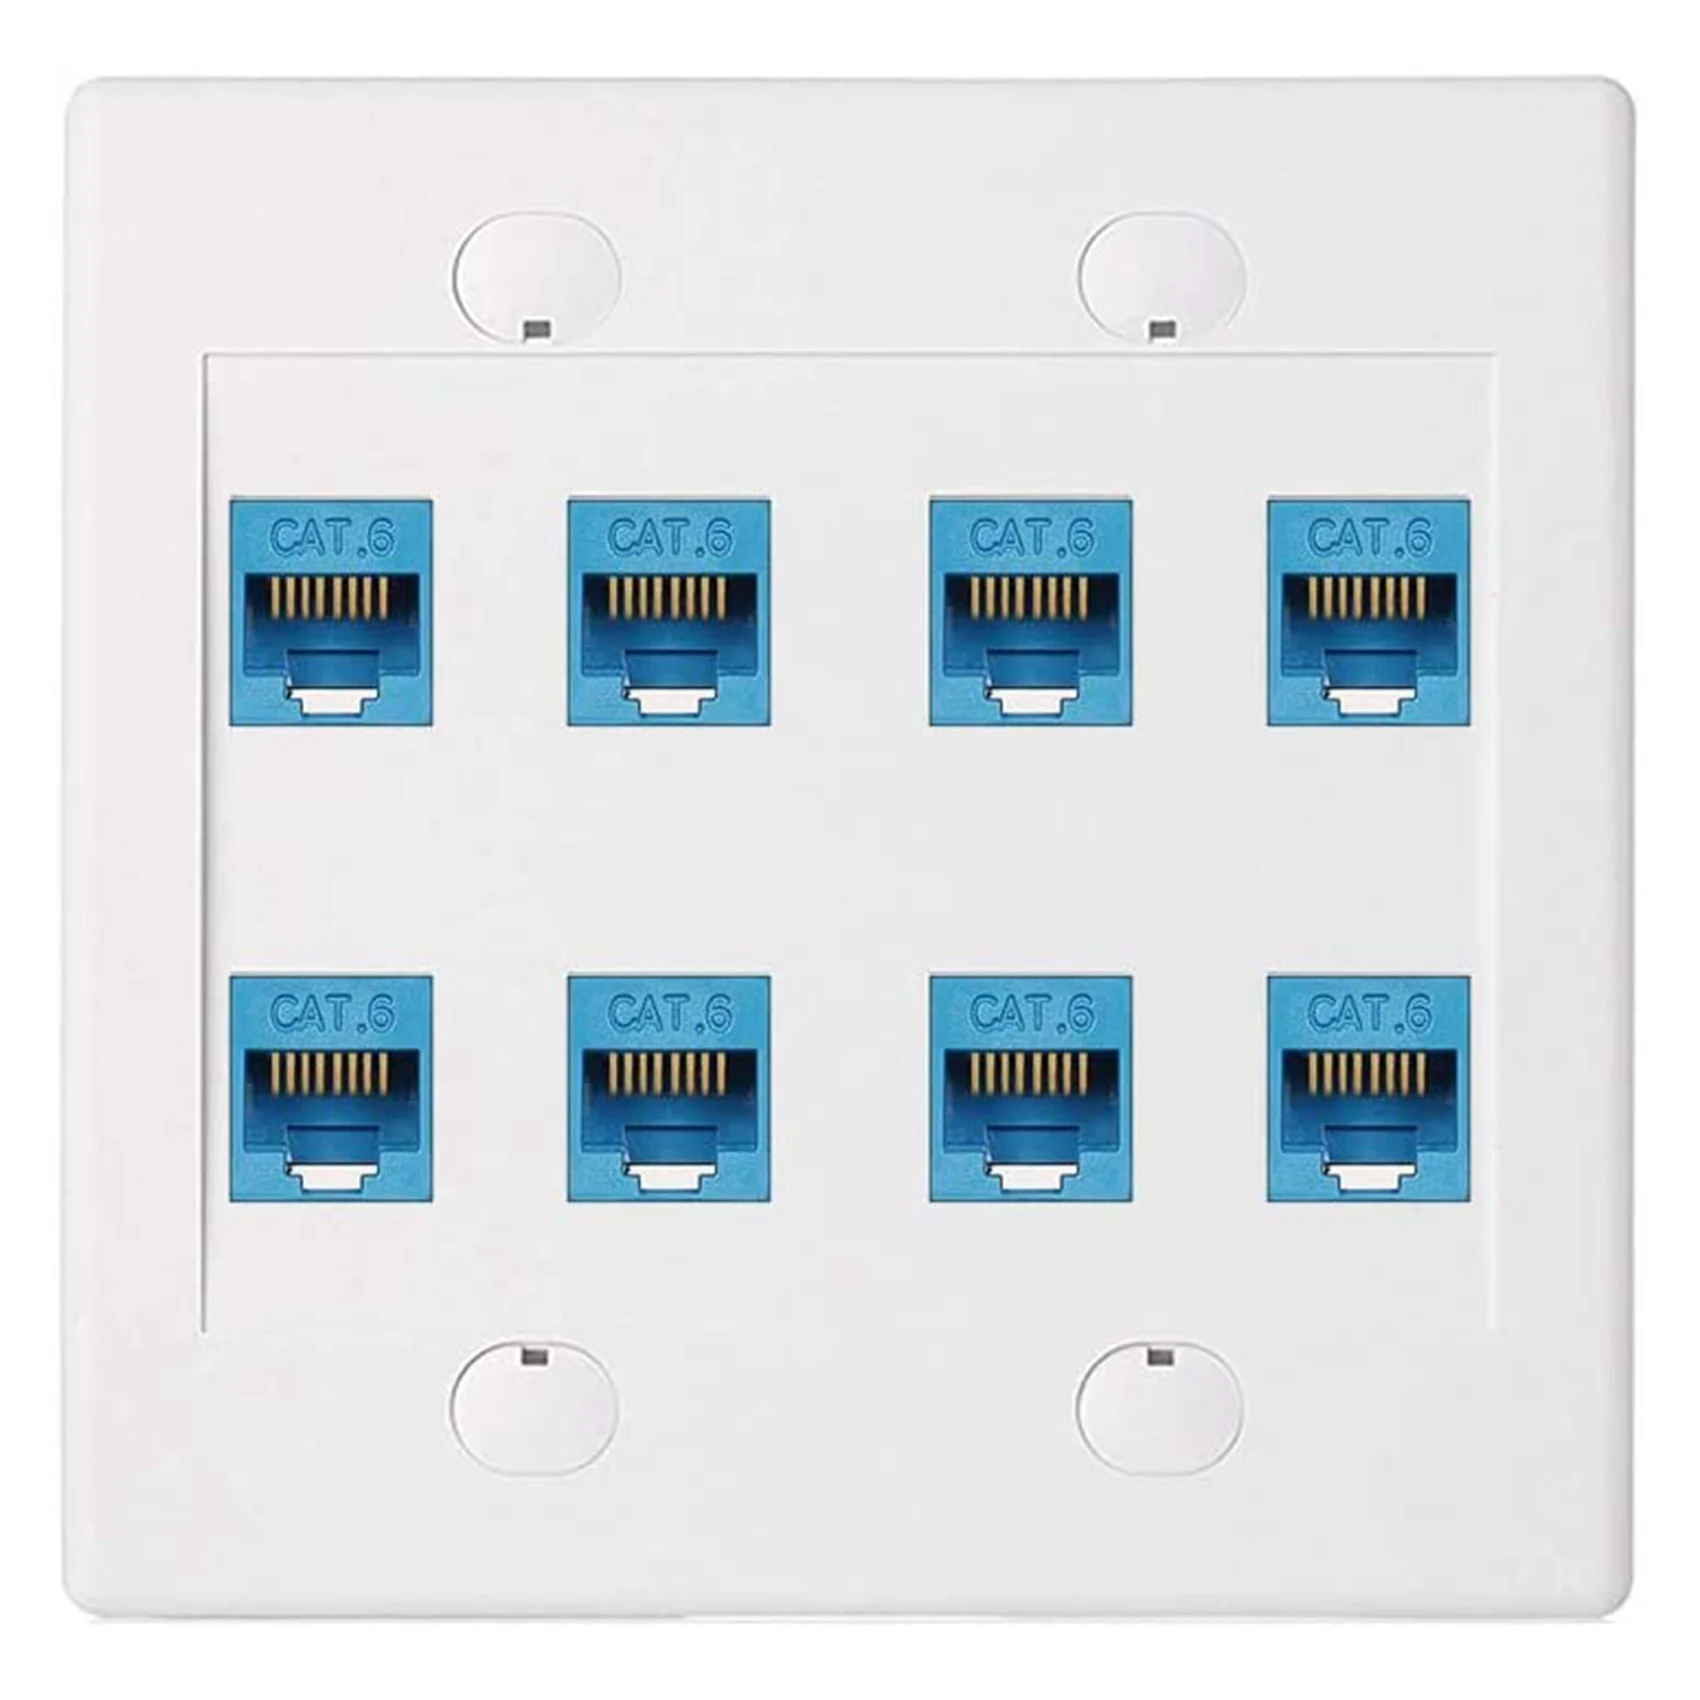 

Ethernet Wall Plate 8 Port - Double Gang Cat6 RJ45 Keystone Jack Network Cable Faceplate Female to Female - Blue